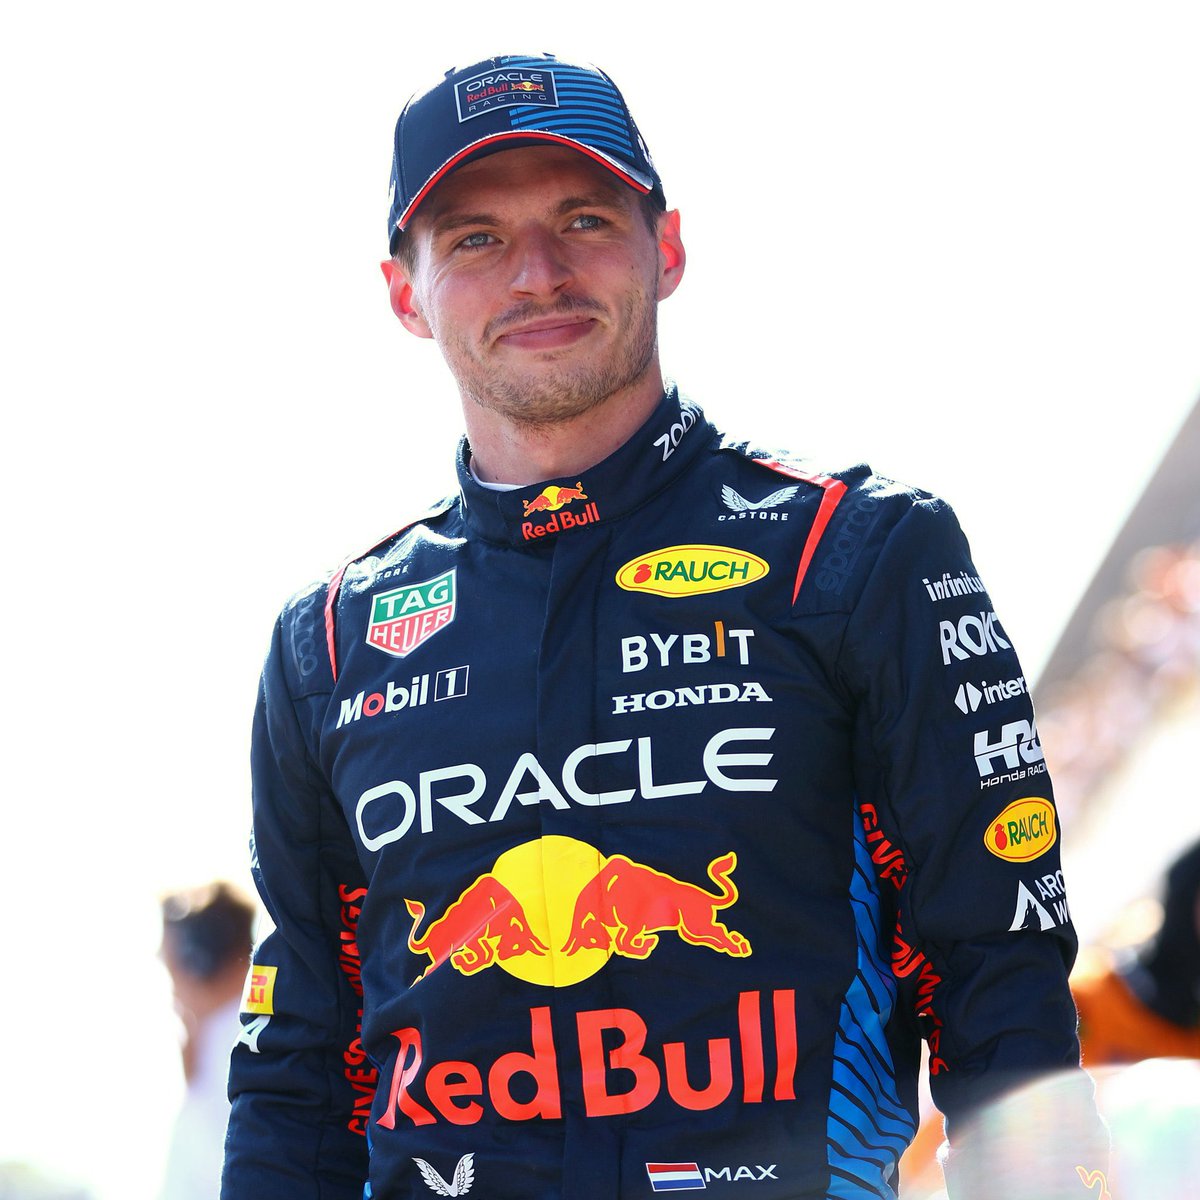 Max Verstappen in Imola: - Ties Ayrton Senna’s record of 8 straight poles - Ties Alain Prost’s record of 7 straight poles to start a season - Drives & wins a 24h sim race with @TeamRedlineSim - Joins Michael Schumacher as only drivers to win Imola 3 straight times Historic.